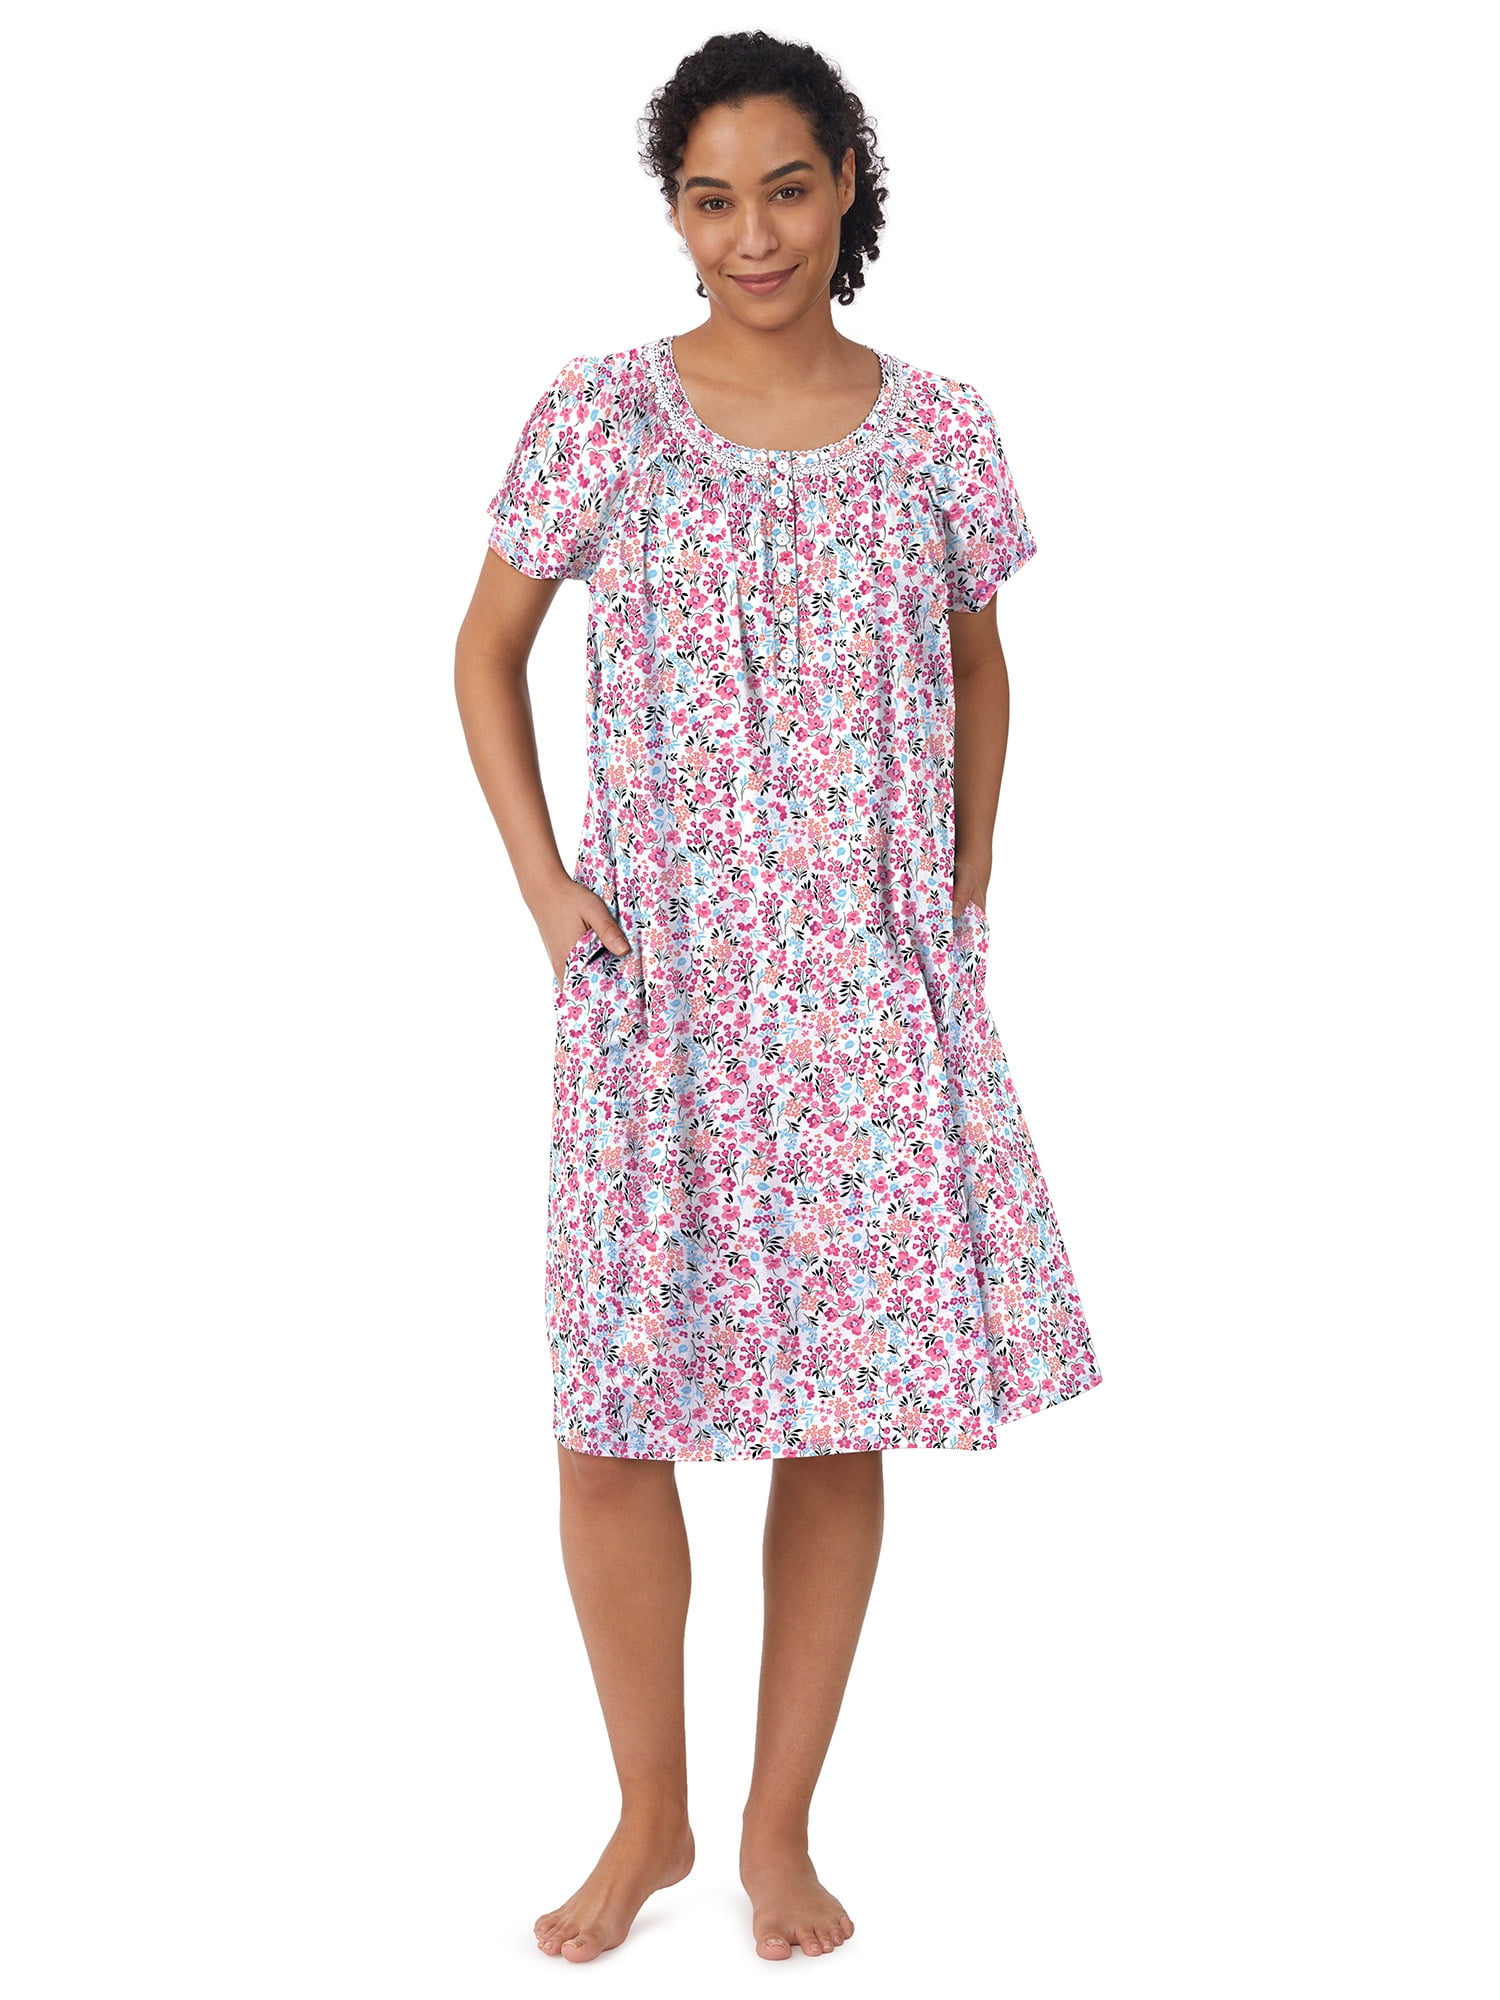 Aria Nightgown with Pockets (Women and Women's Plus) - Walmart.com